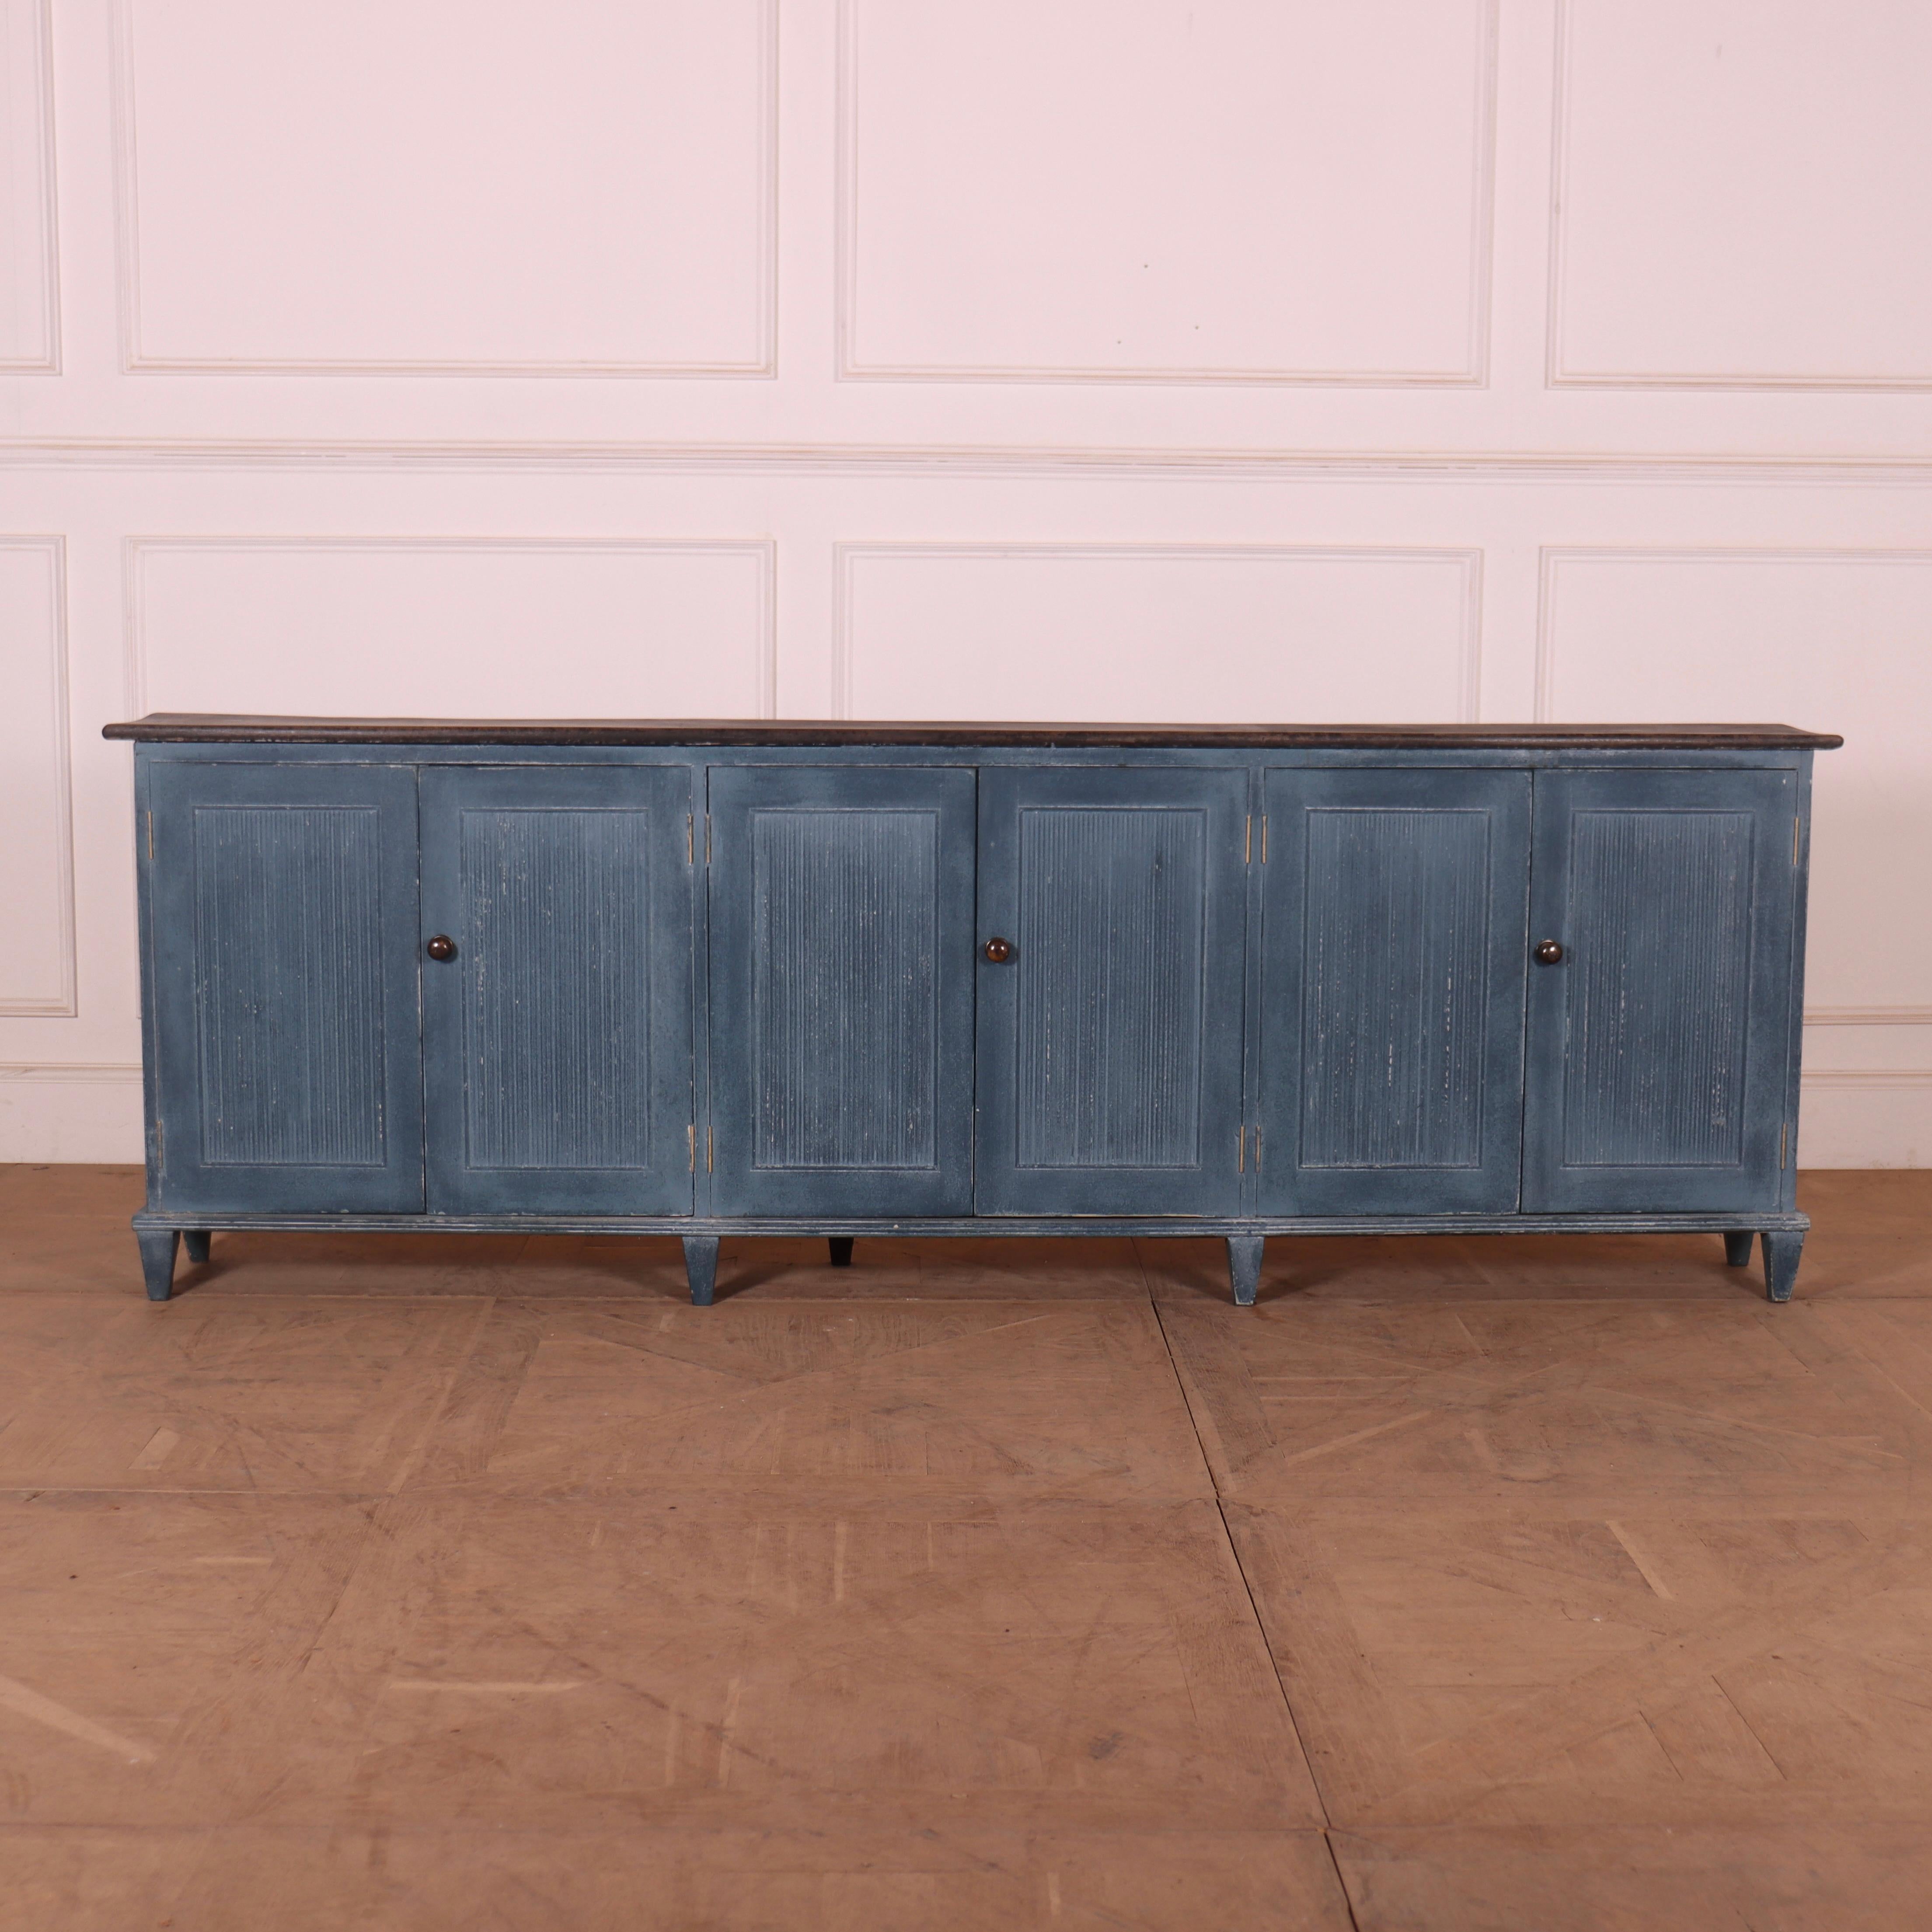 Narrow early 19th century Danish 6 door painted pine sideboard with fitted interior. 1820.

Reference: 7816

Dimensions
93 inches (236 cms) Wide
11.5 inches (29 cms) Deep
31 inches (79 cms) High